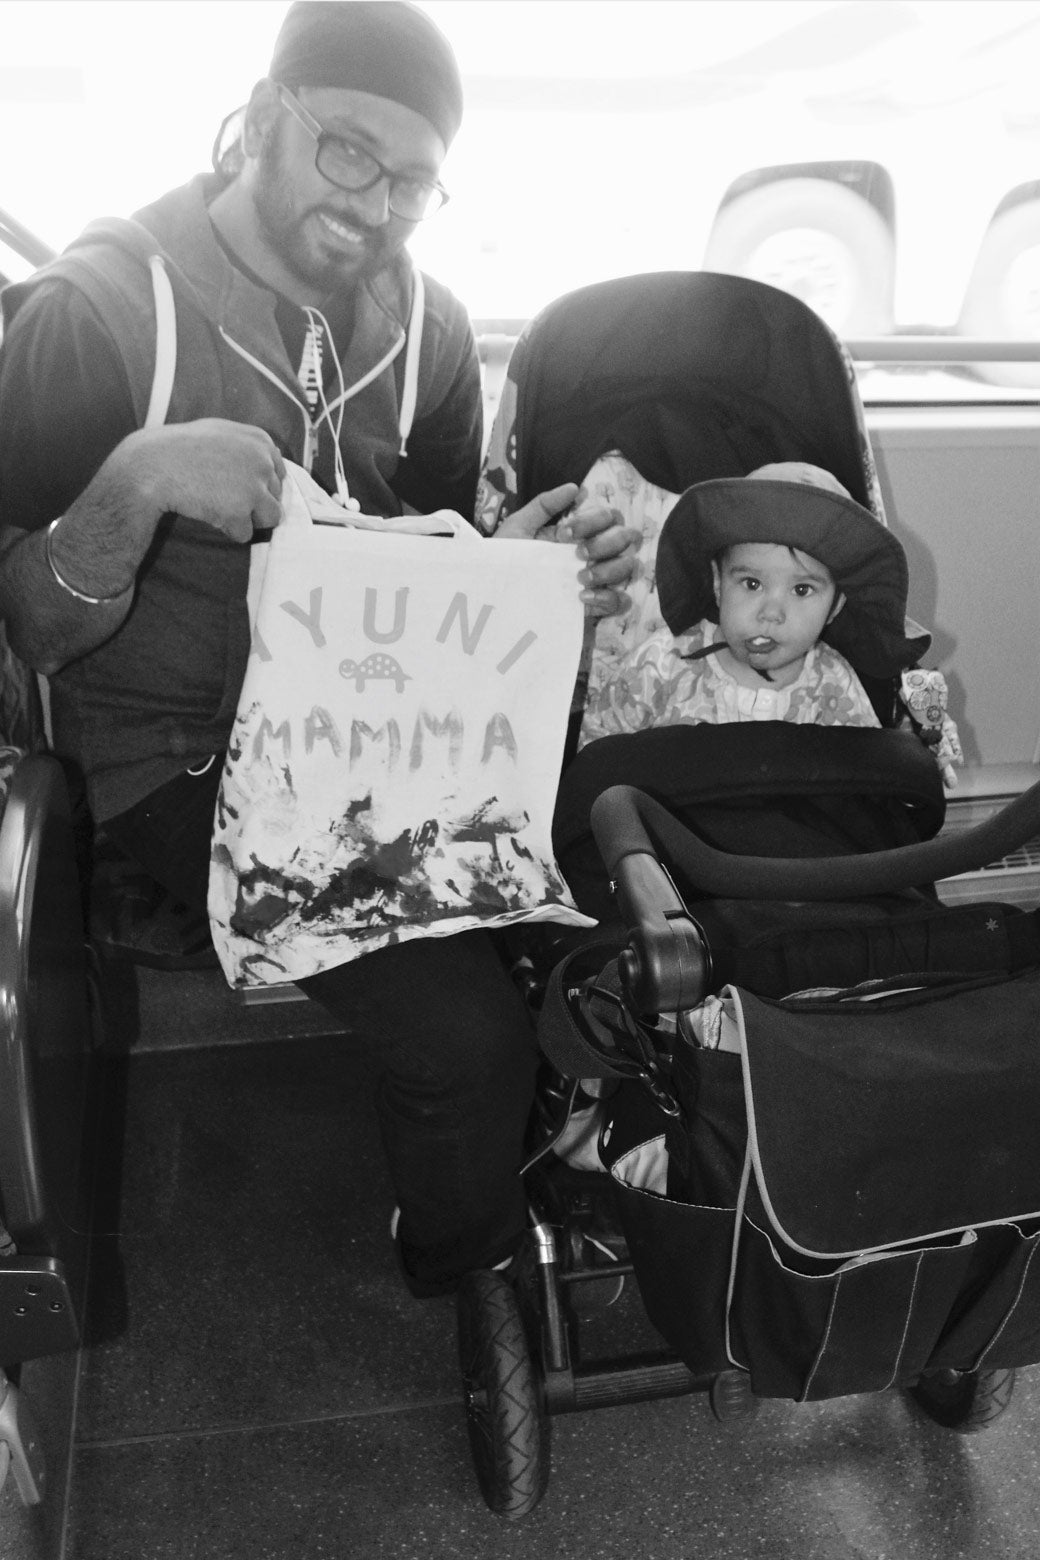 This father, himself a bus driver, commutes home on the bus with his daughter after picking her up from day care (dagis). Parents with strollers ride public buses for free in Stockholm. He proudly holds up an art project she made that day for her mother. 